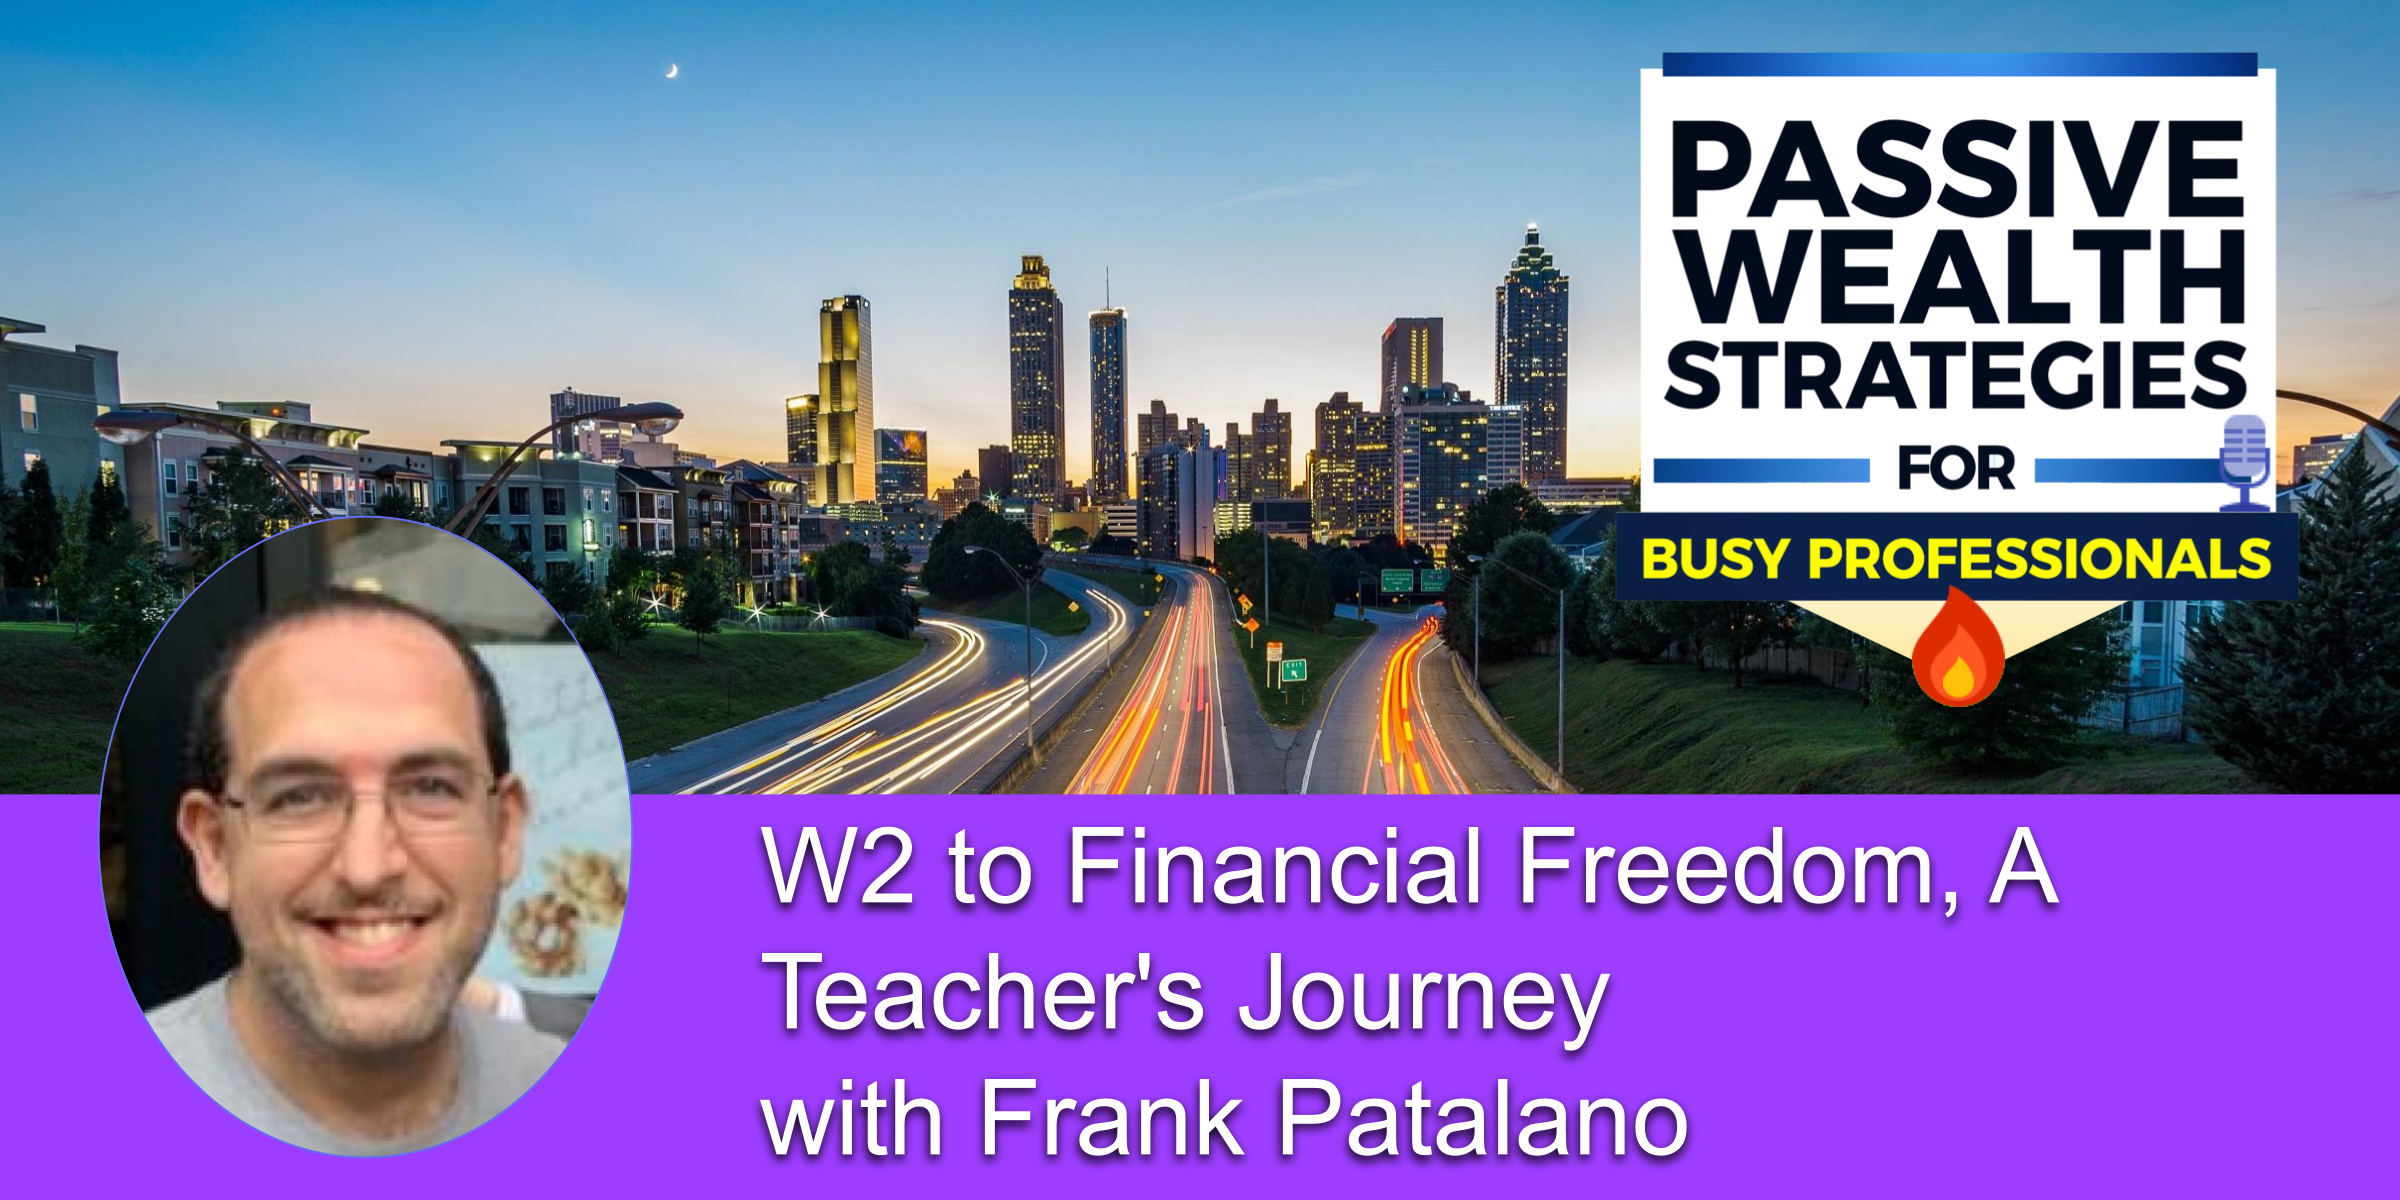 Frank Patalano Financial Independence Podcast